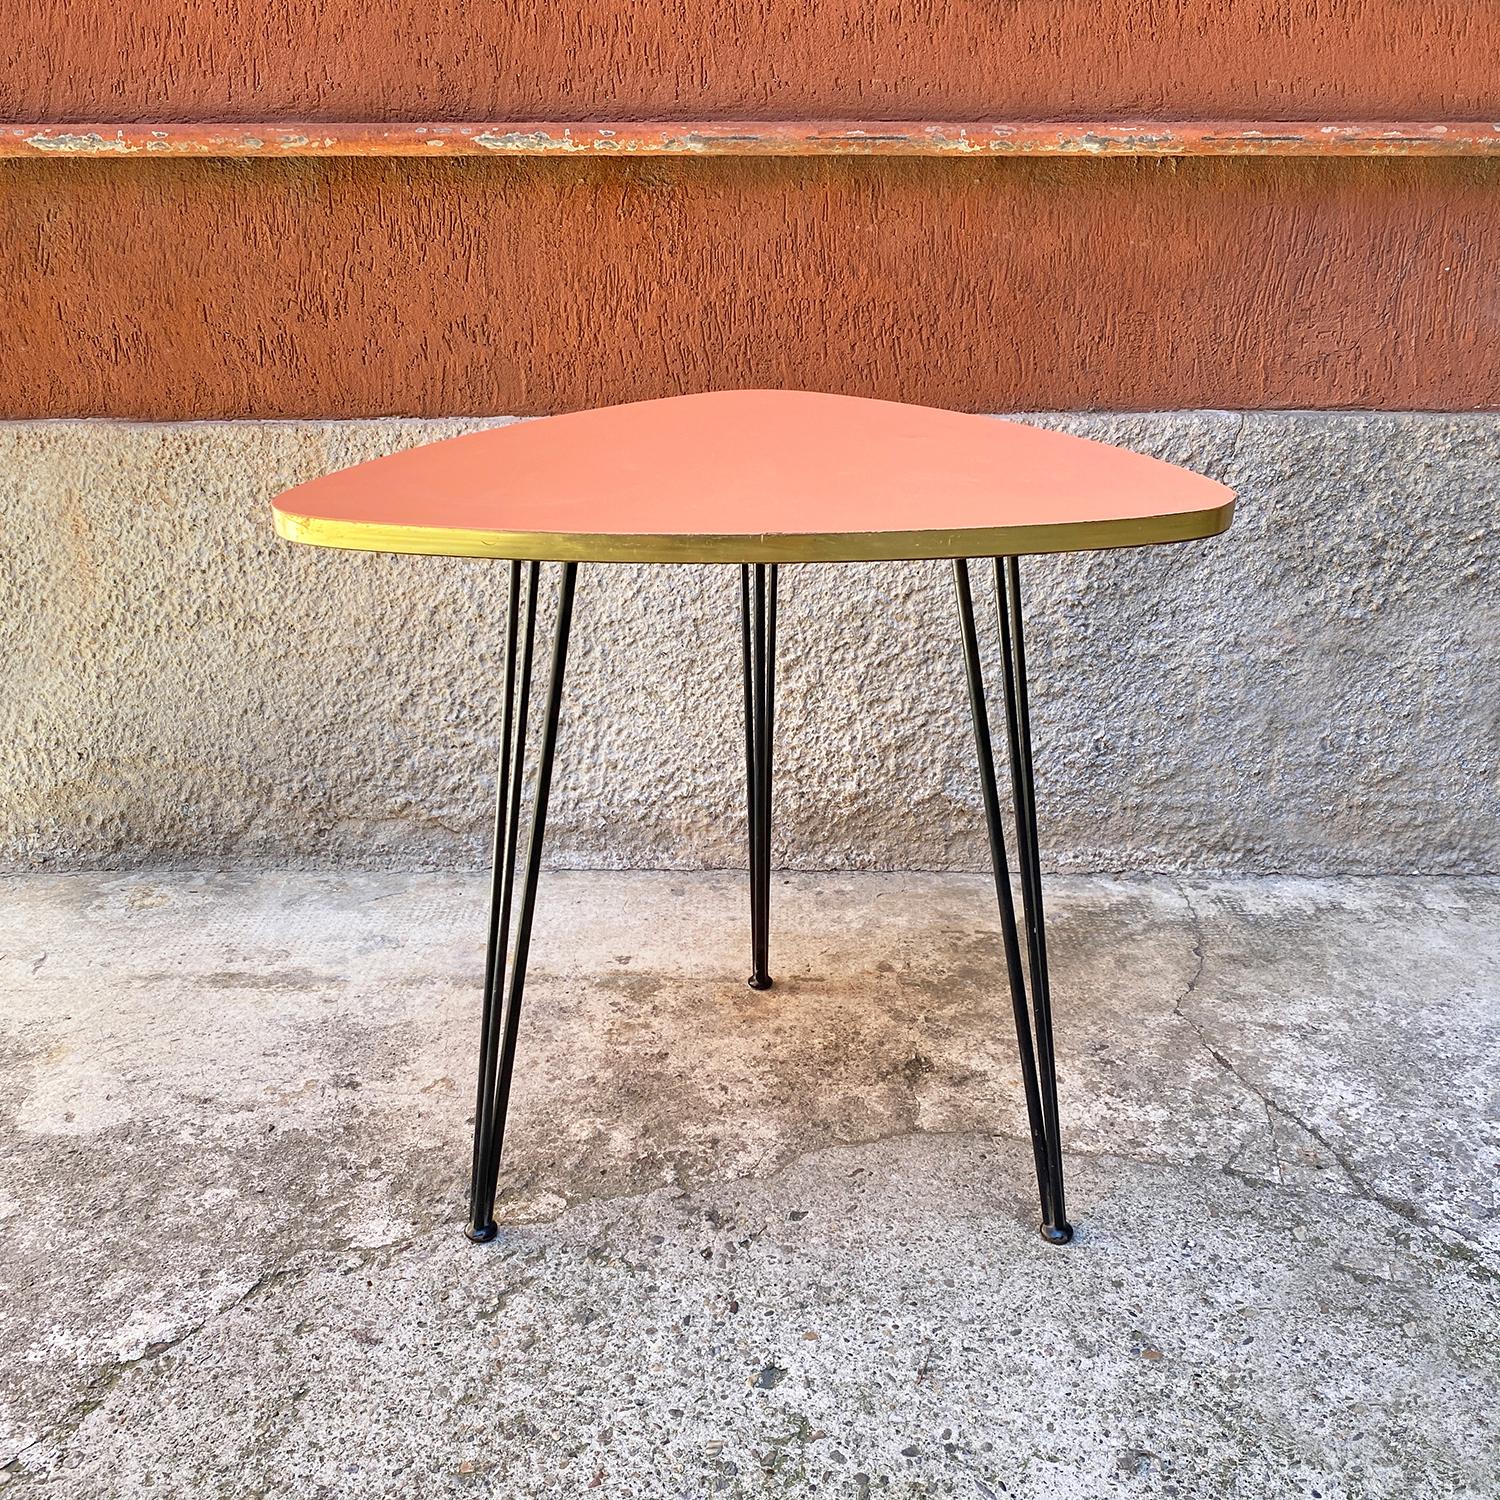 Italian Mid-Century Modern pink coffee table with metal rod, 1960s
Pink coffee table with top with rounded corners, top painted in salmon pink with golden border and legs in black metal rod.

Excellent general conditions.

Measurements 67 x 70